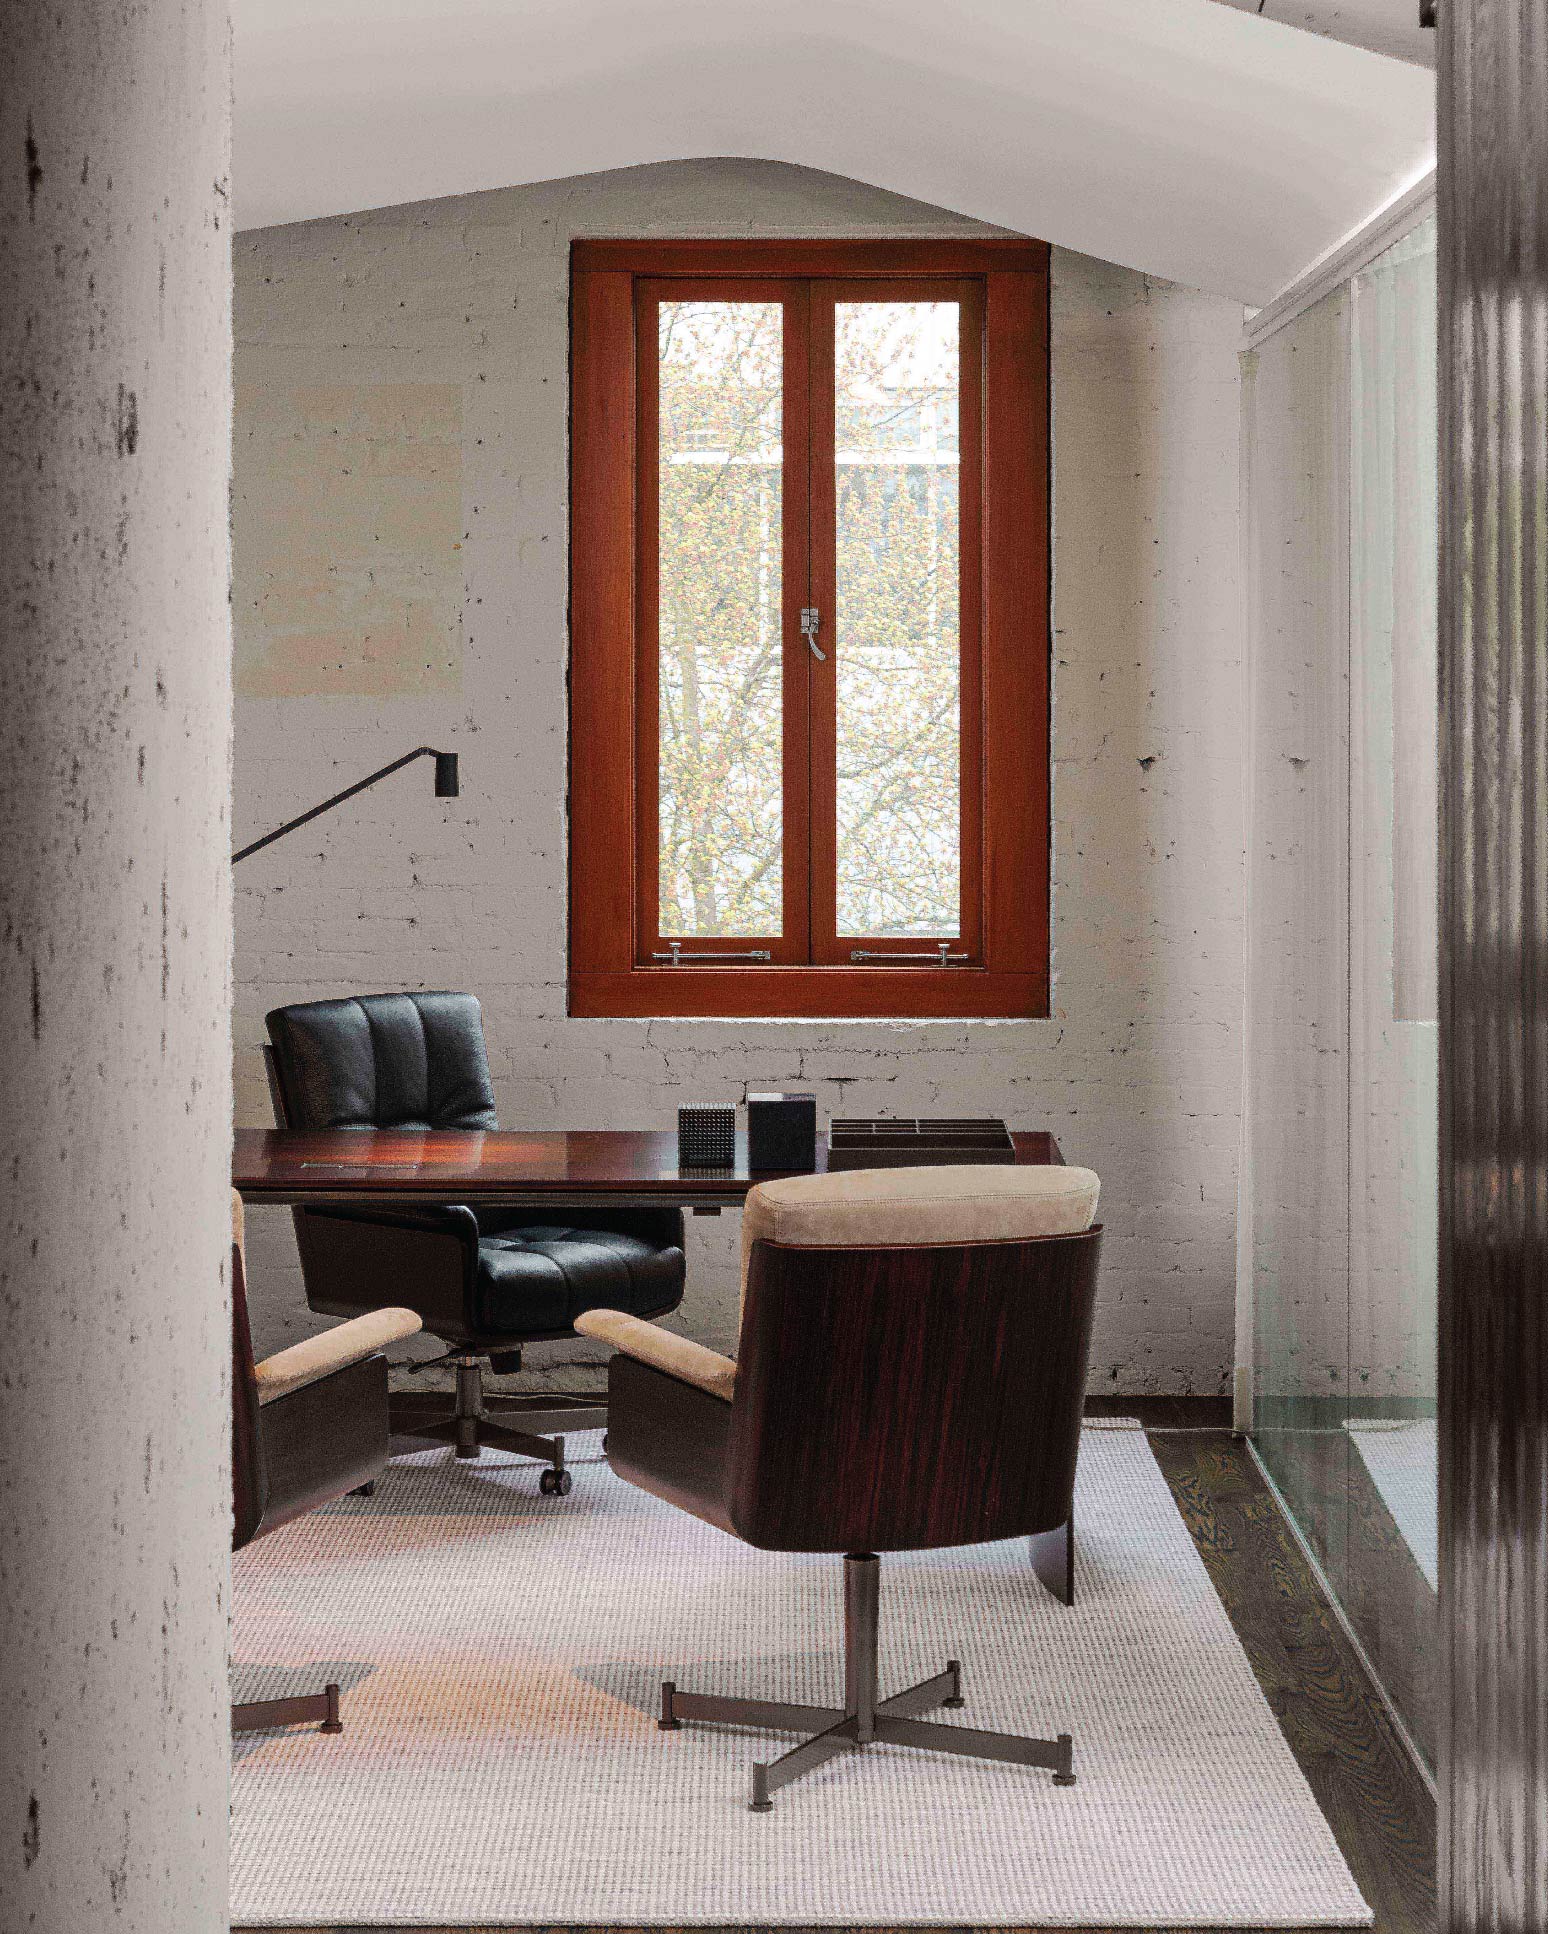 The first official work chair from Minotti – Daiki Studio and the Linha Studio desk designed by Marcio Kogan / studio mk27.